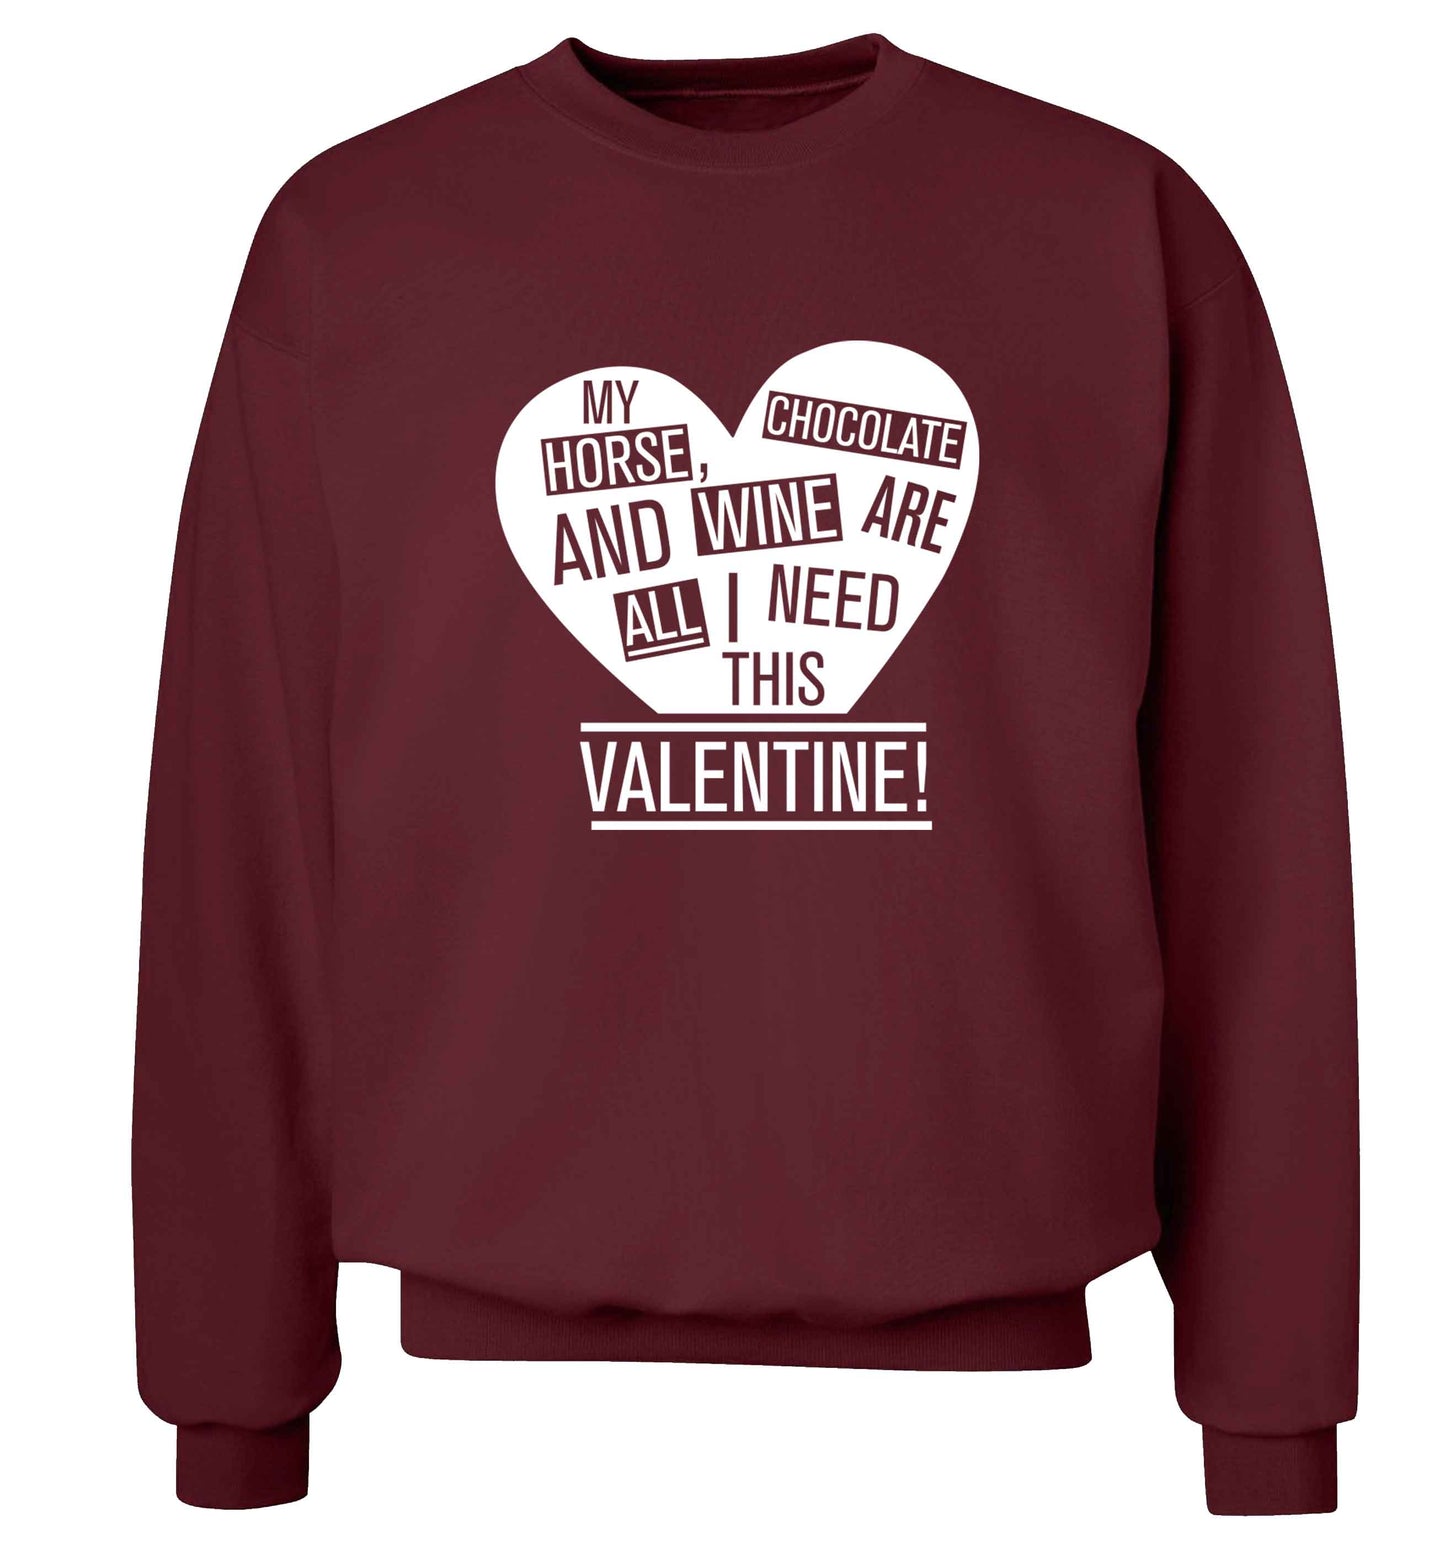 My horse chocolate and wine are all I need this valentine adult's unisex maroon sweater 2XL